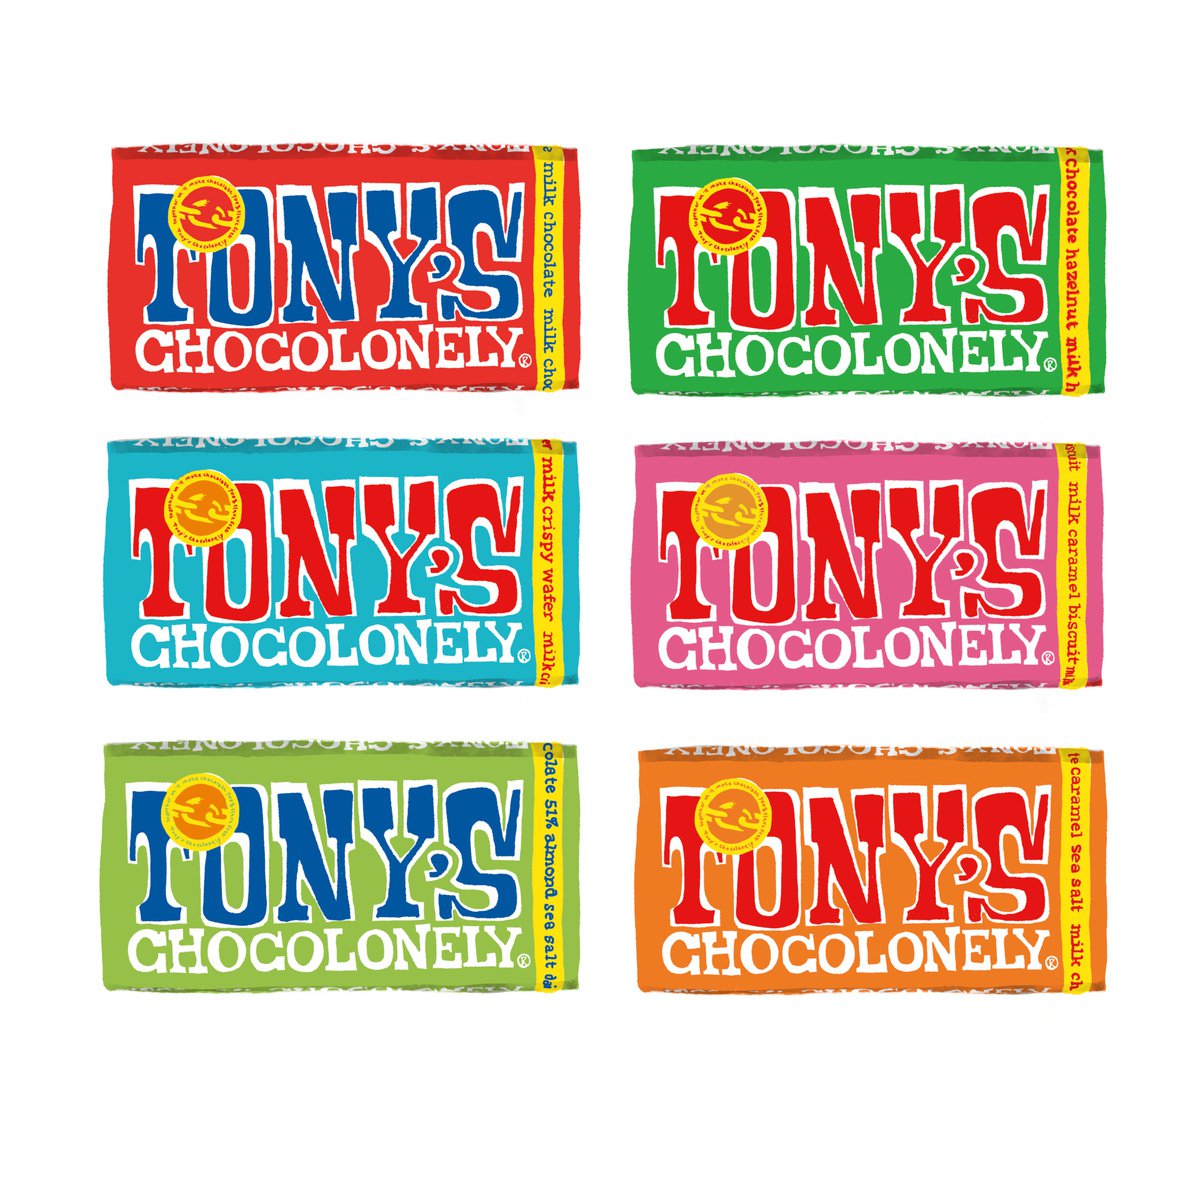 Chocolonely- limited-edition, giclee print by Design Smith